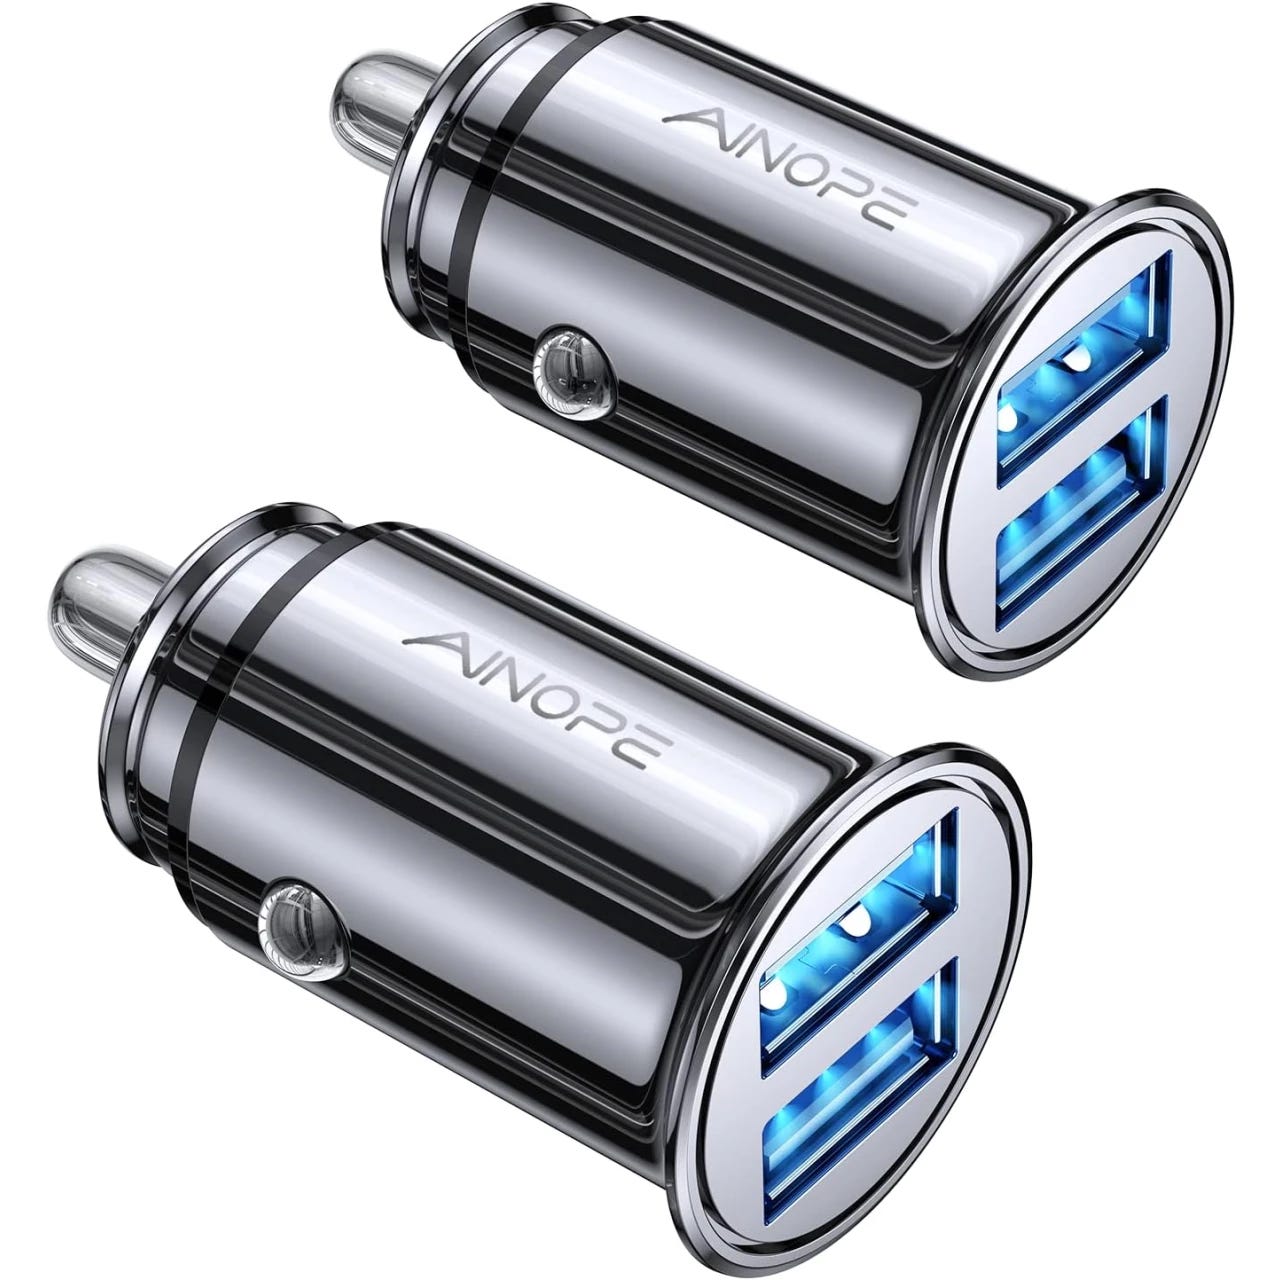 Top 5 Car Chargers in 2023: AINOPE, Fast Charge Dual Port, and